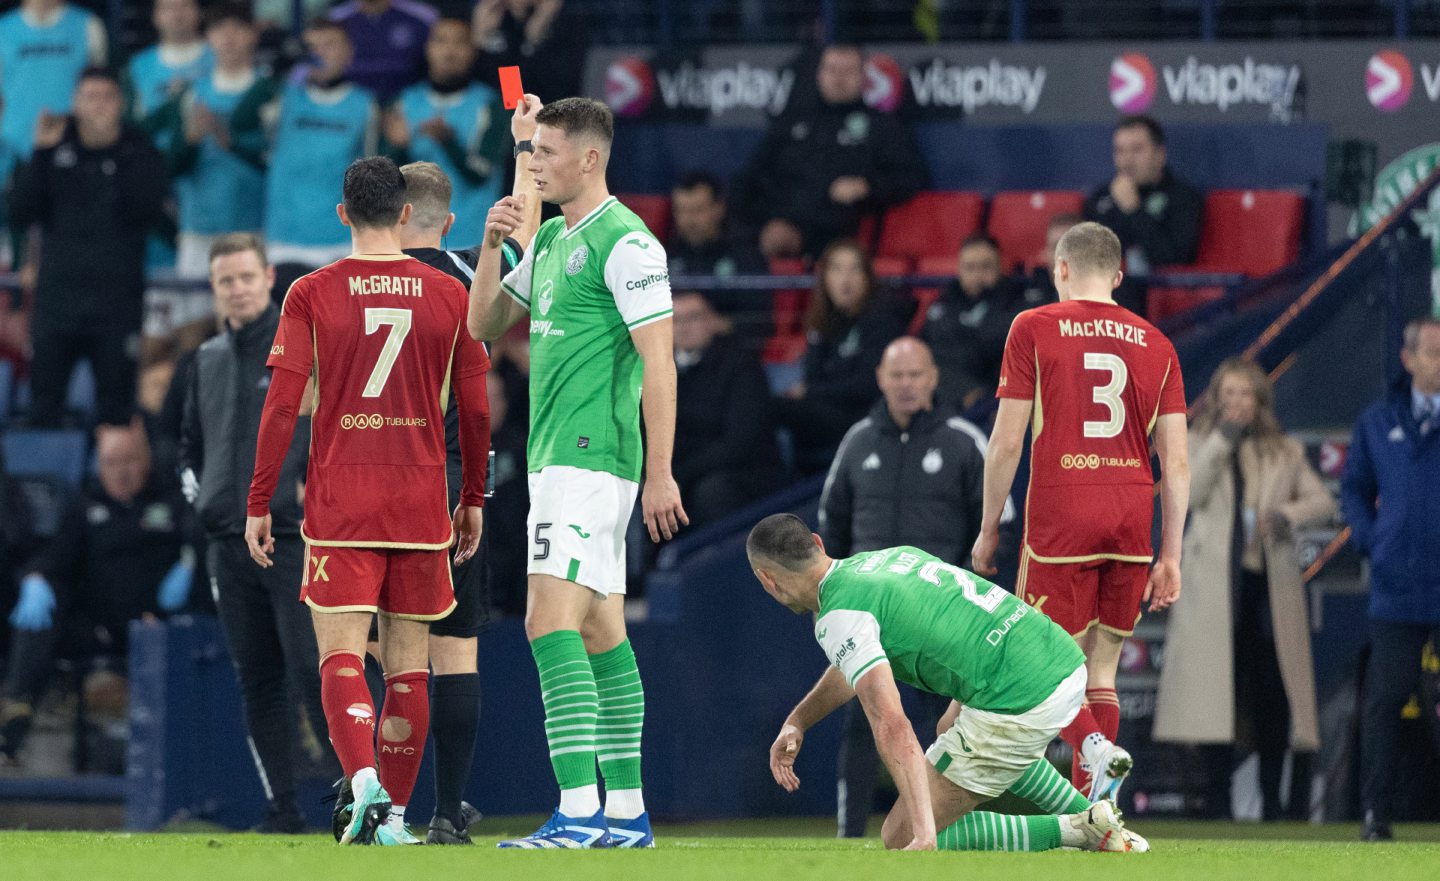 Aberdeen's Jack MacKenzie is shown a red card by the Referee